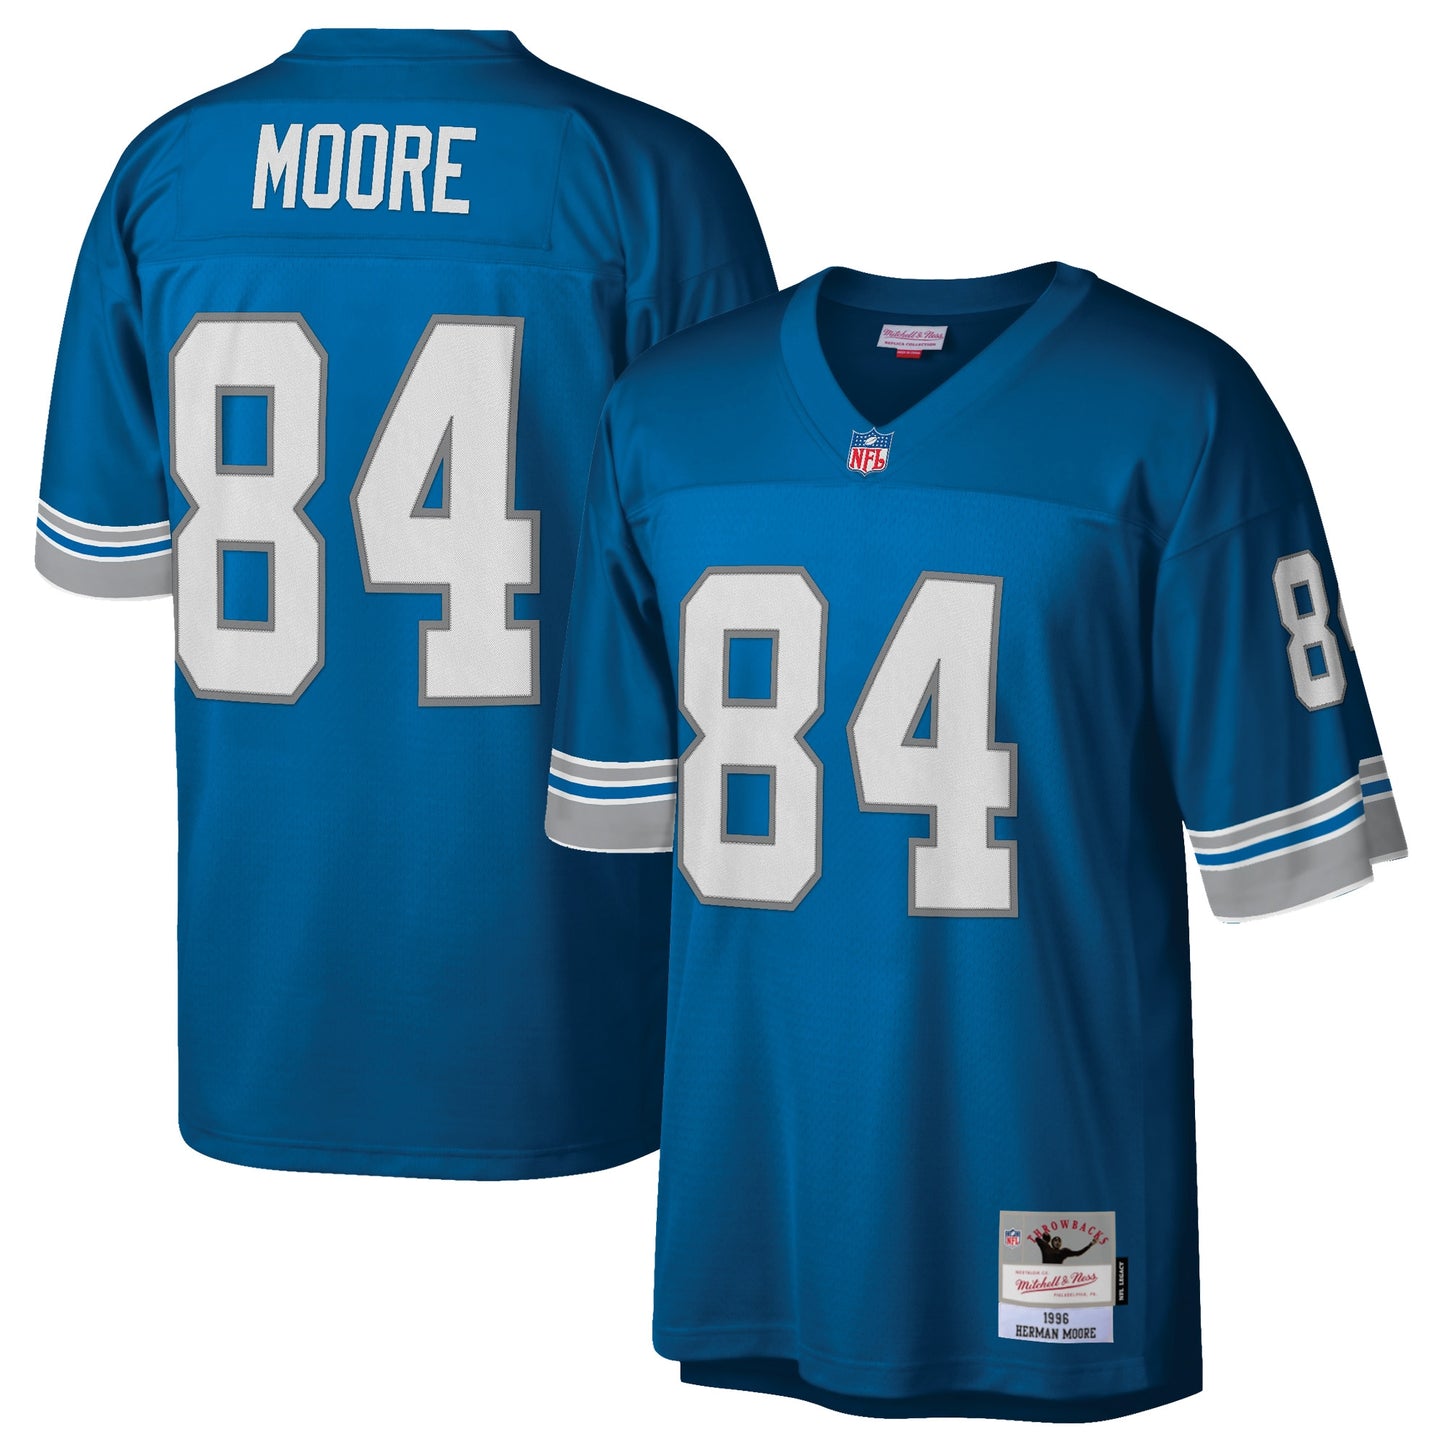 Herman Moore Detroit Lions Mitchell & Ness Retired Player Legacy Replica Jersey - Blue